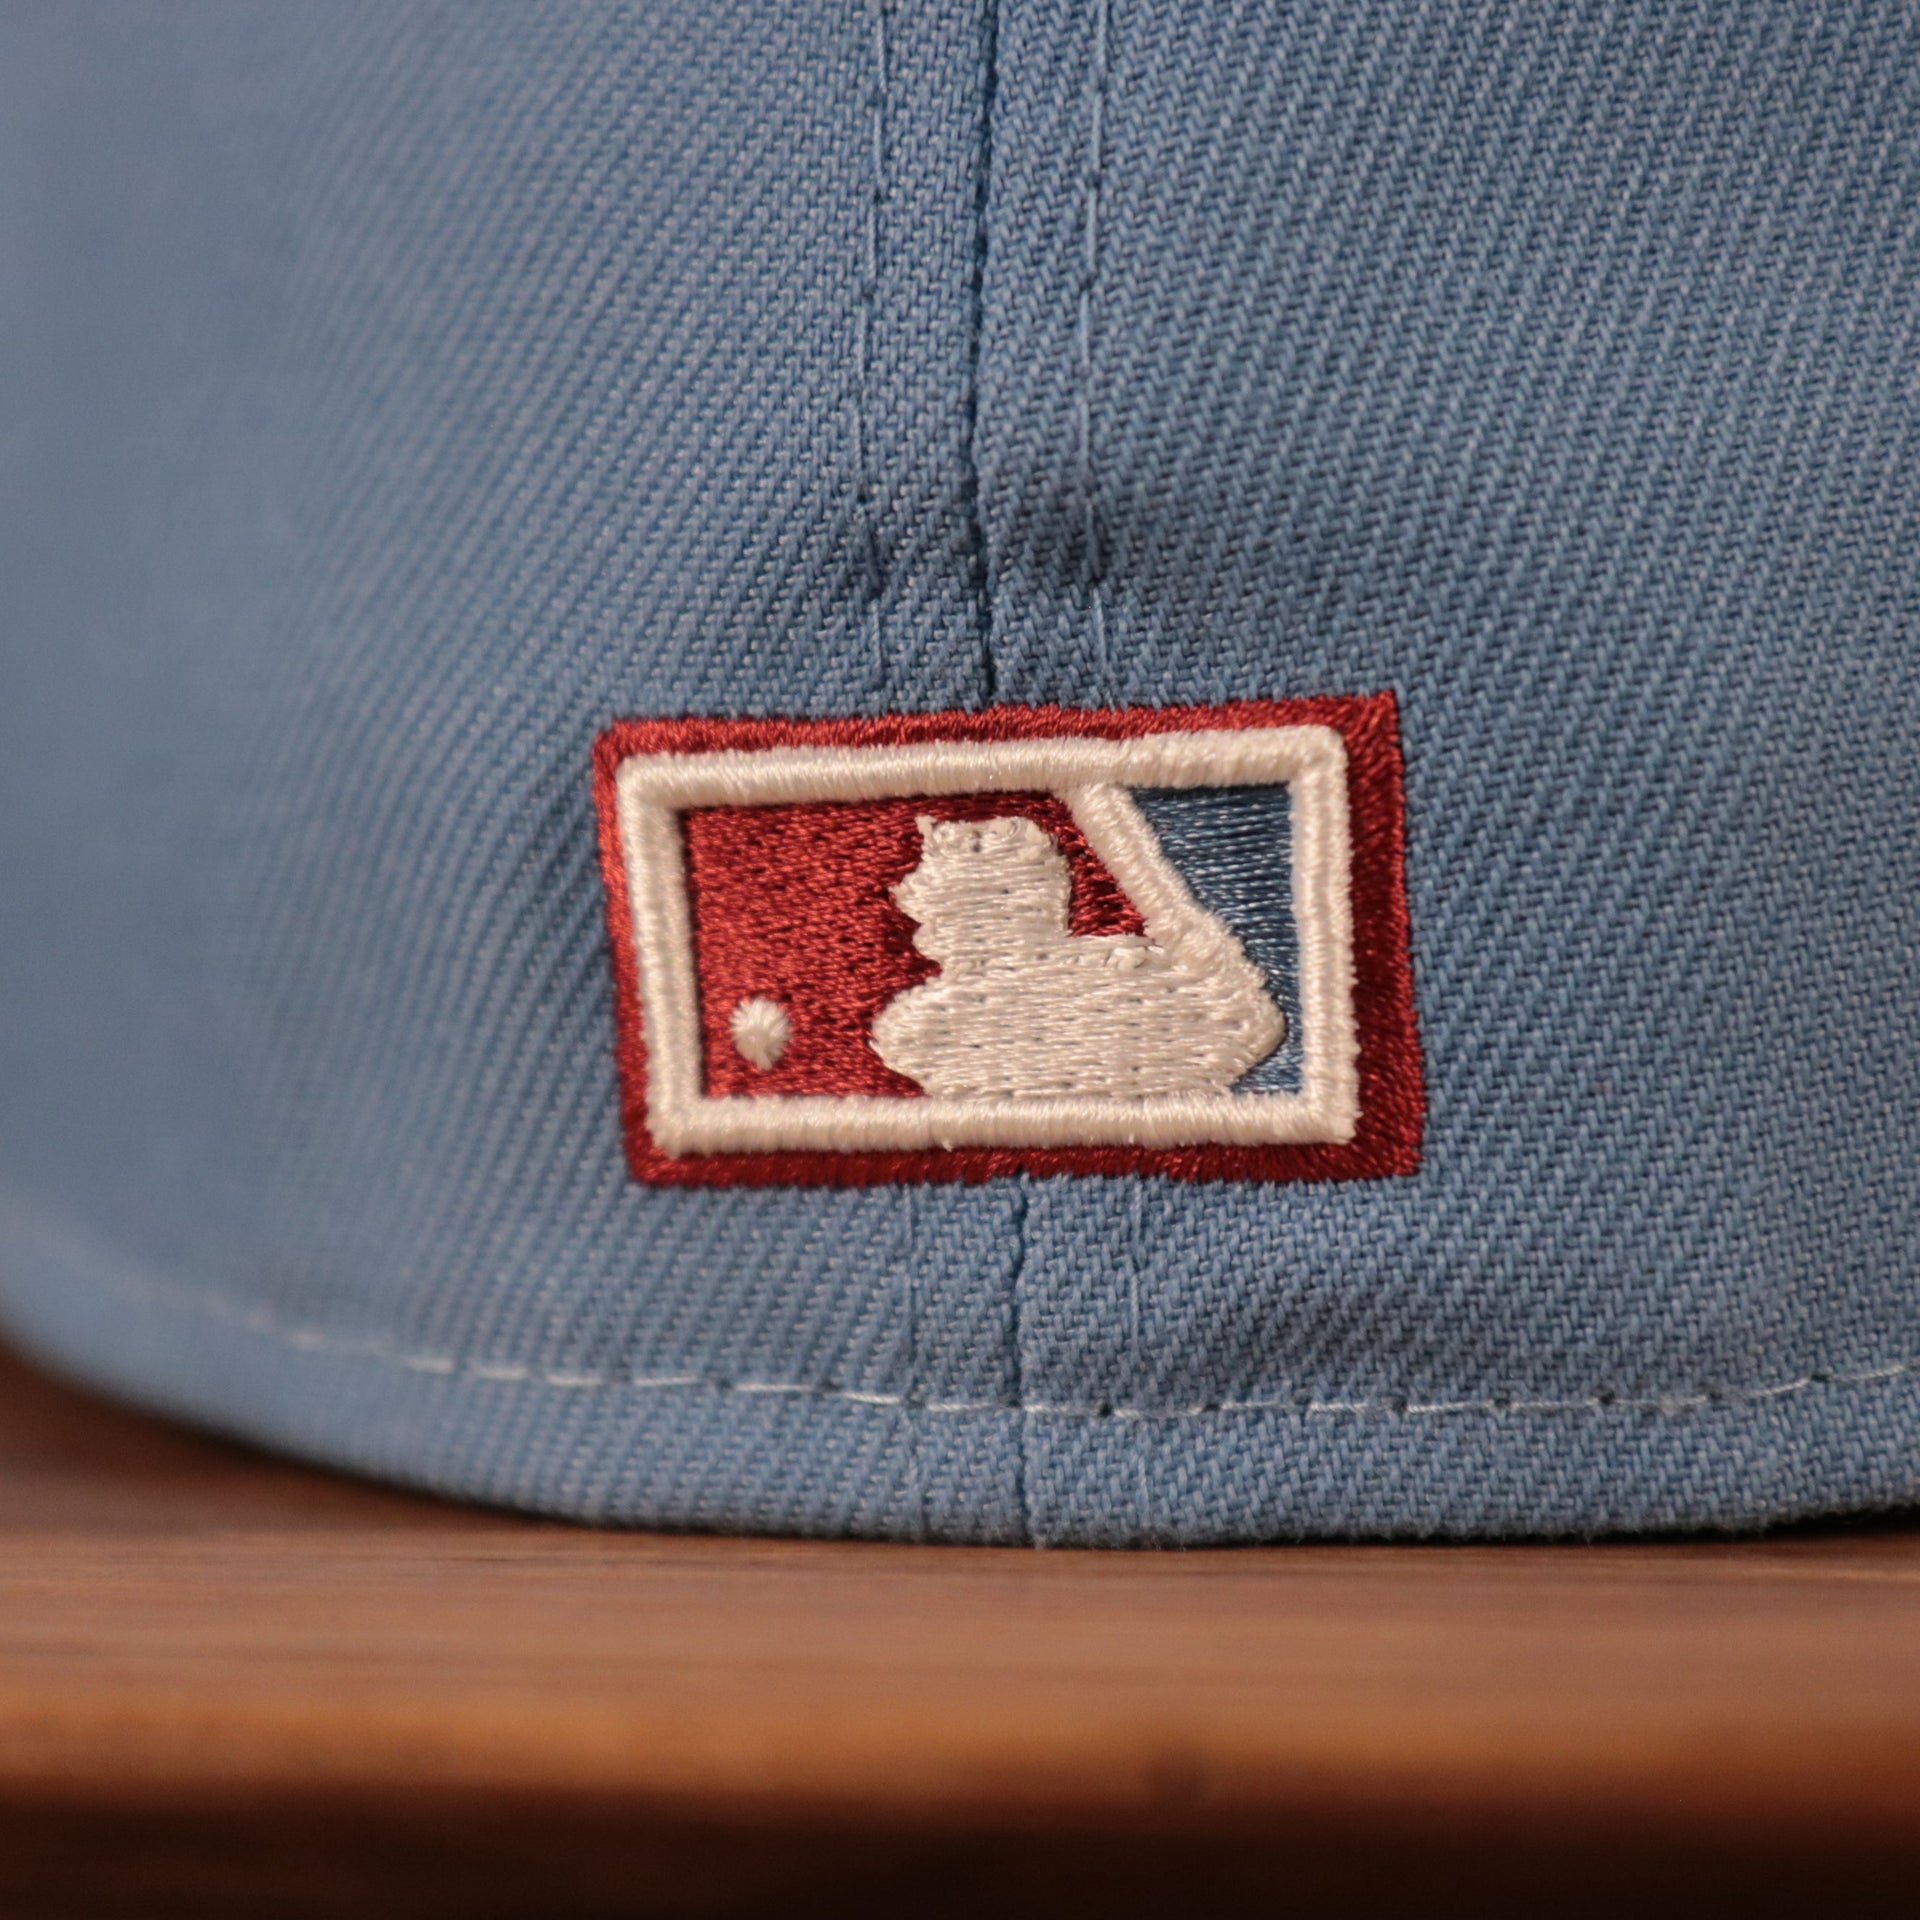 The backside of the ice blue/maroon Phillies 1980 World Series side patch fitted New Era 59fifty has the MLB logo.